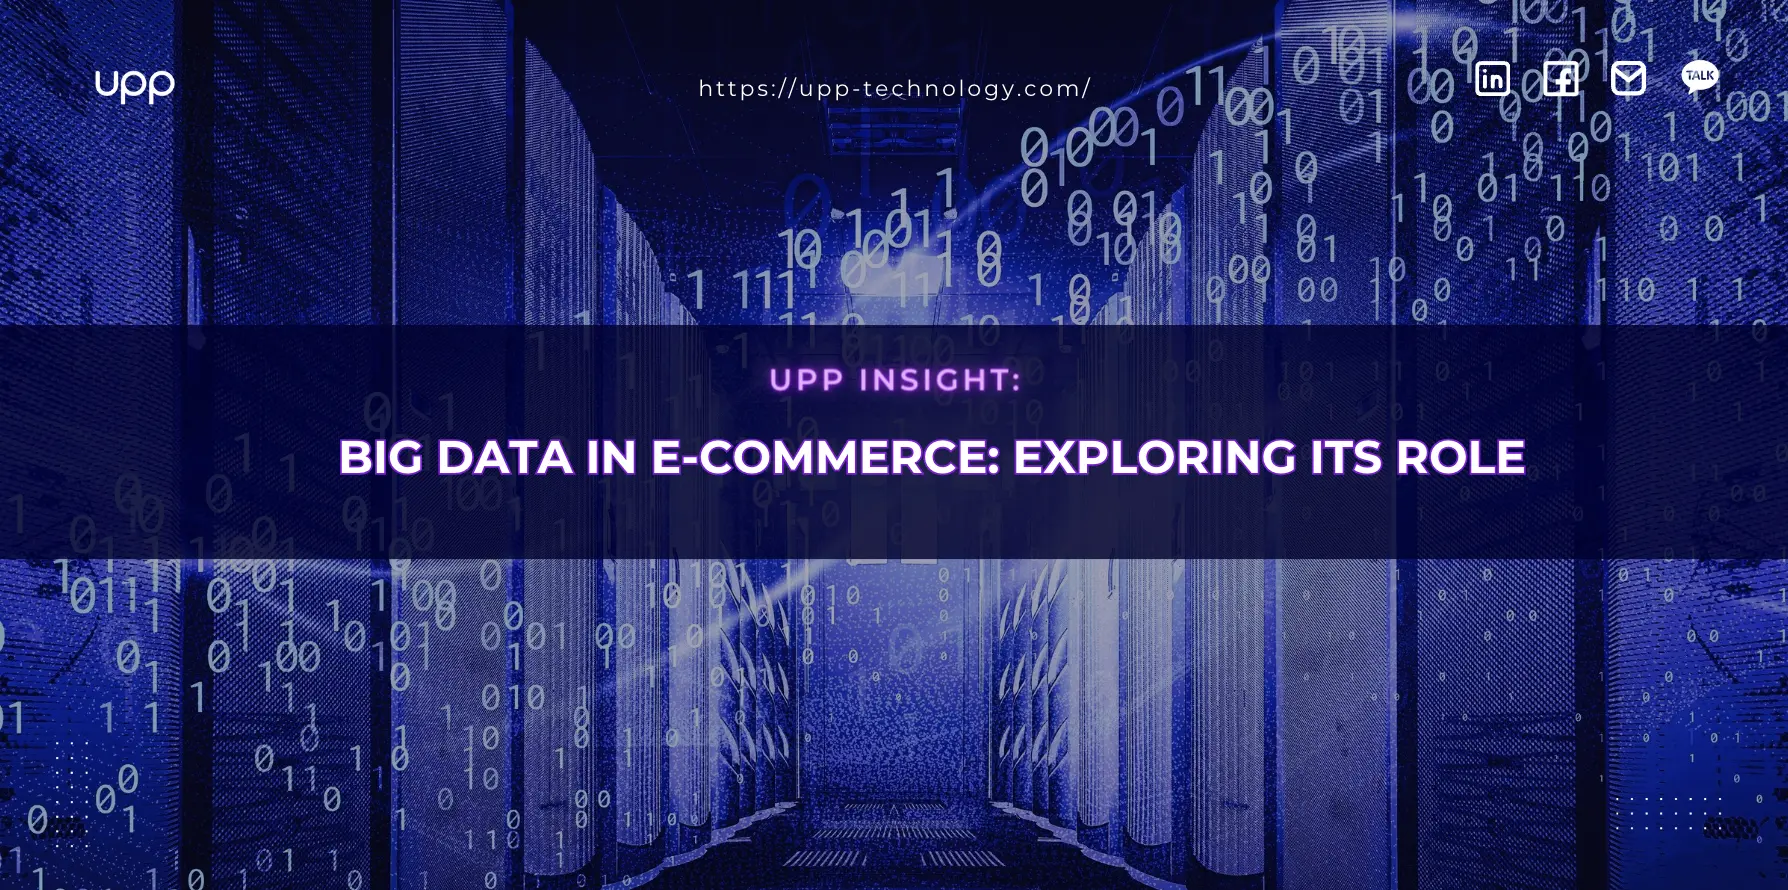 BIG DATA IN E-COMMERCE: EXPLORING ITS ROLE